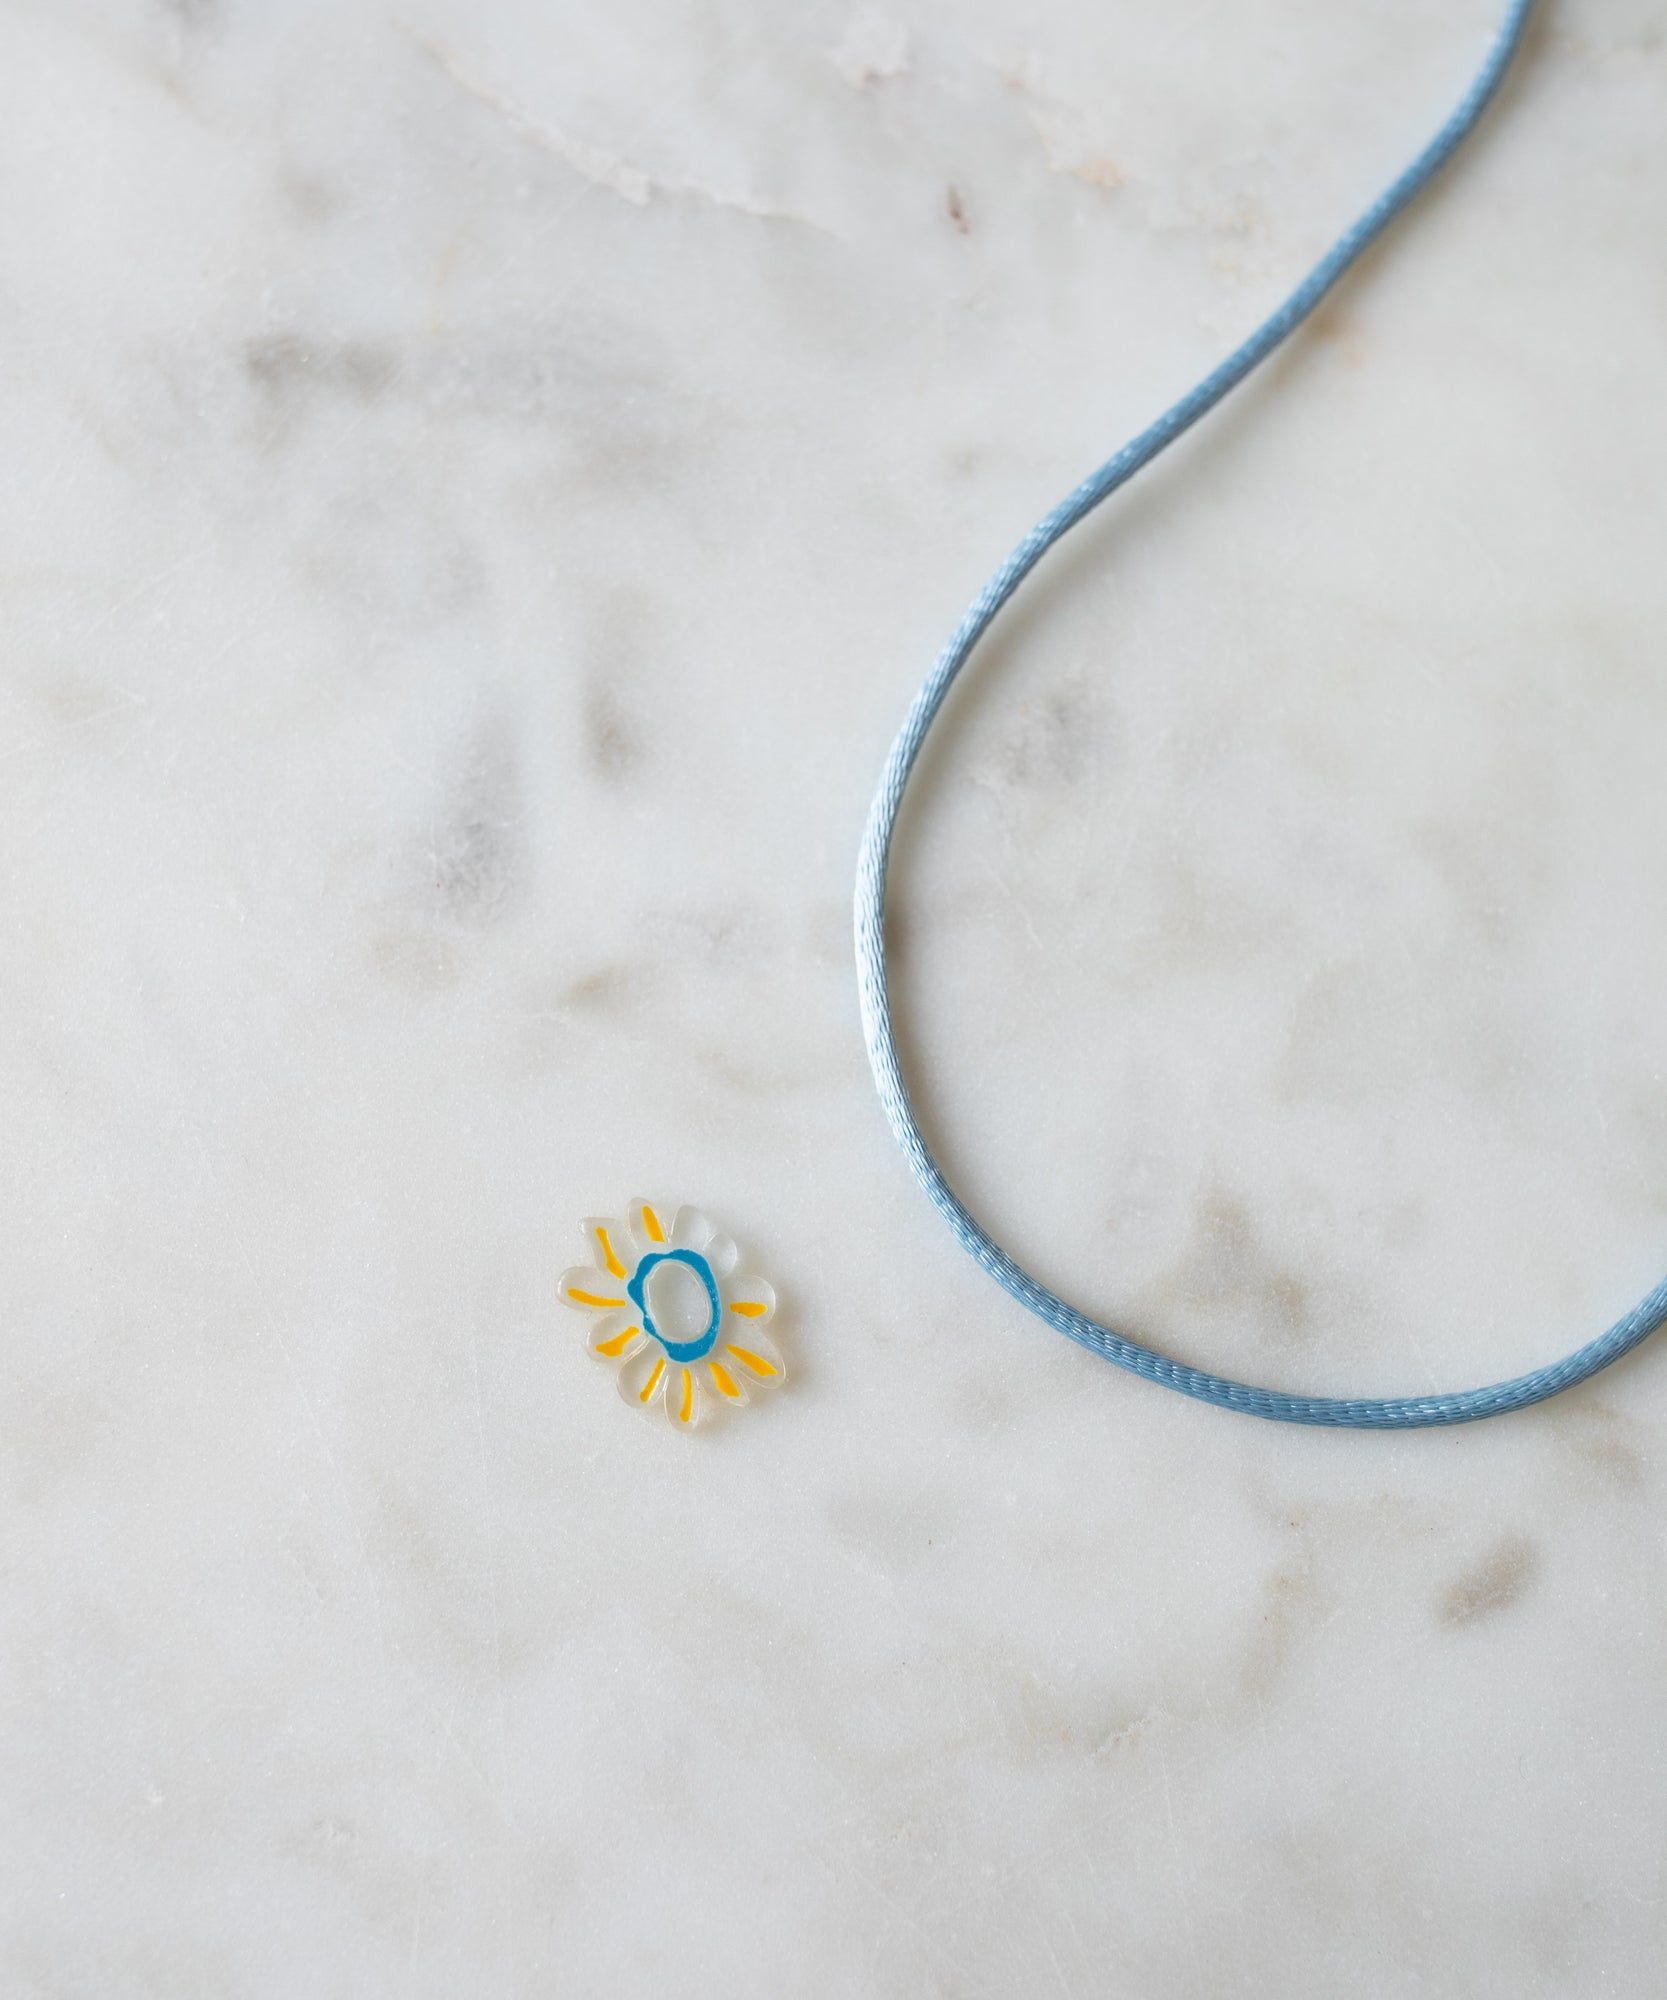 A Daisy Transparent Charm pendant with a turquoise center and a blue cord on a marble surface, ideal for DIY jewelry enthusiasts by WALD World.